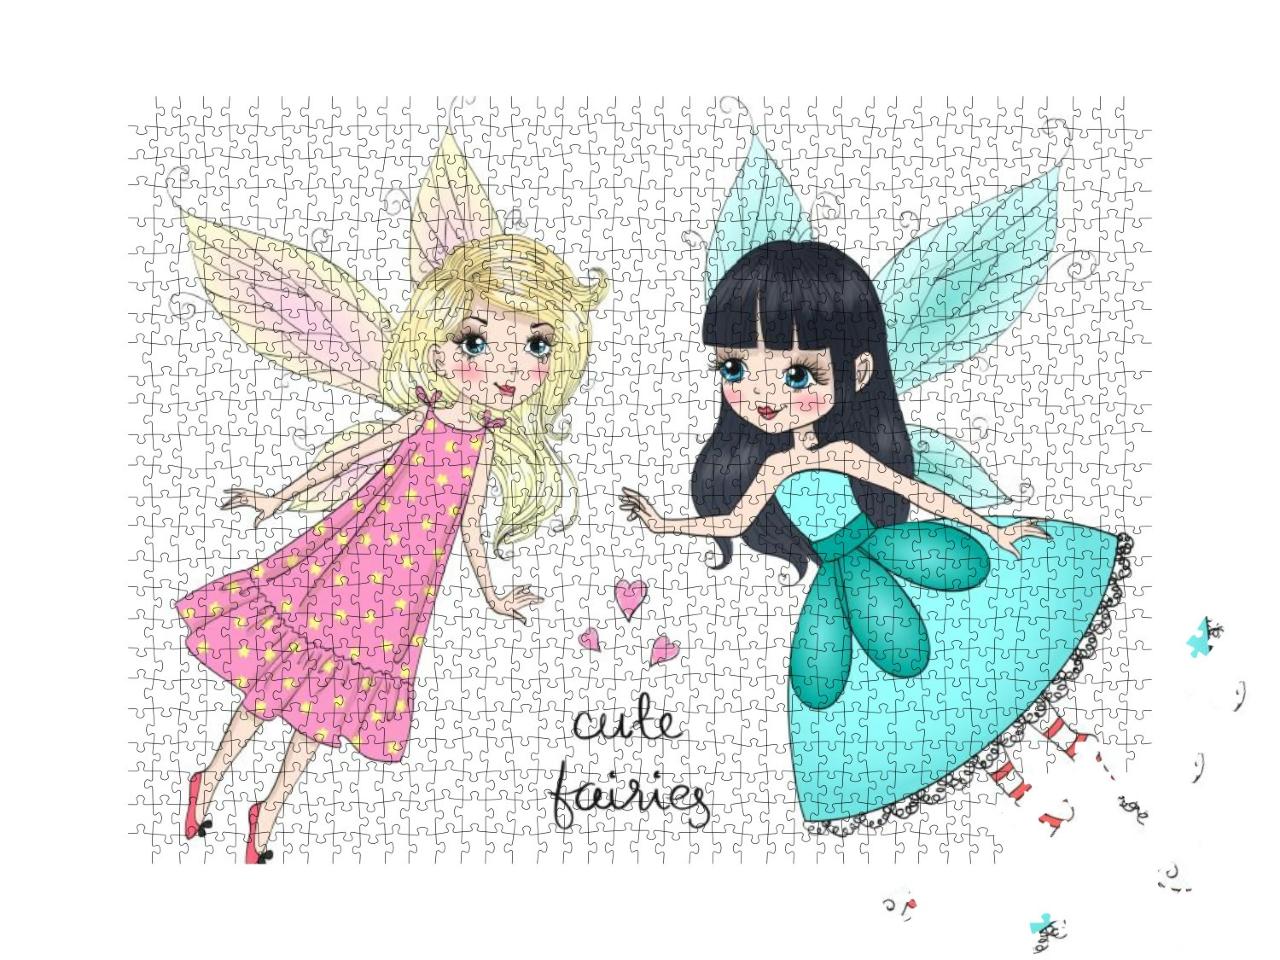 Two Hand Drawn Beautiful Cute Little Fairies Girls... Jigsaw Puzzle with 1000 pieces